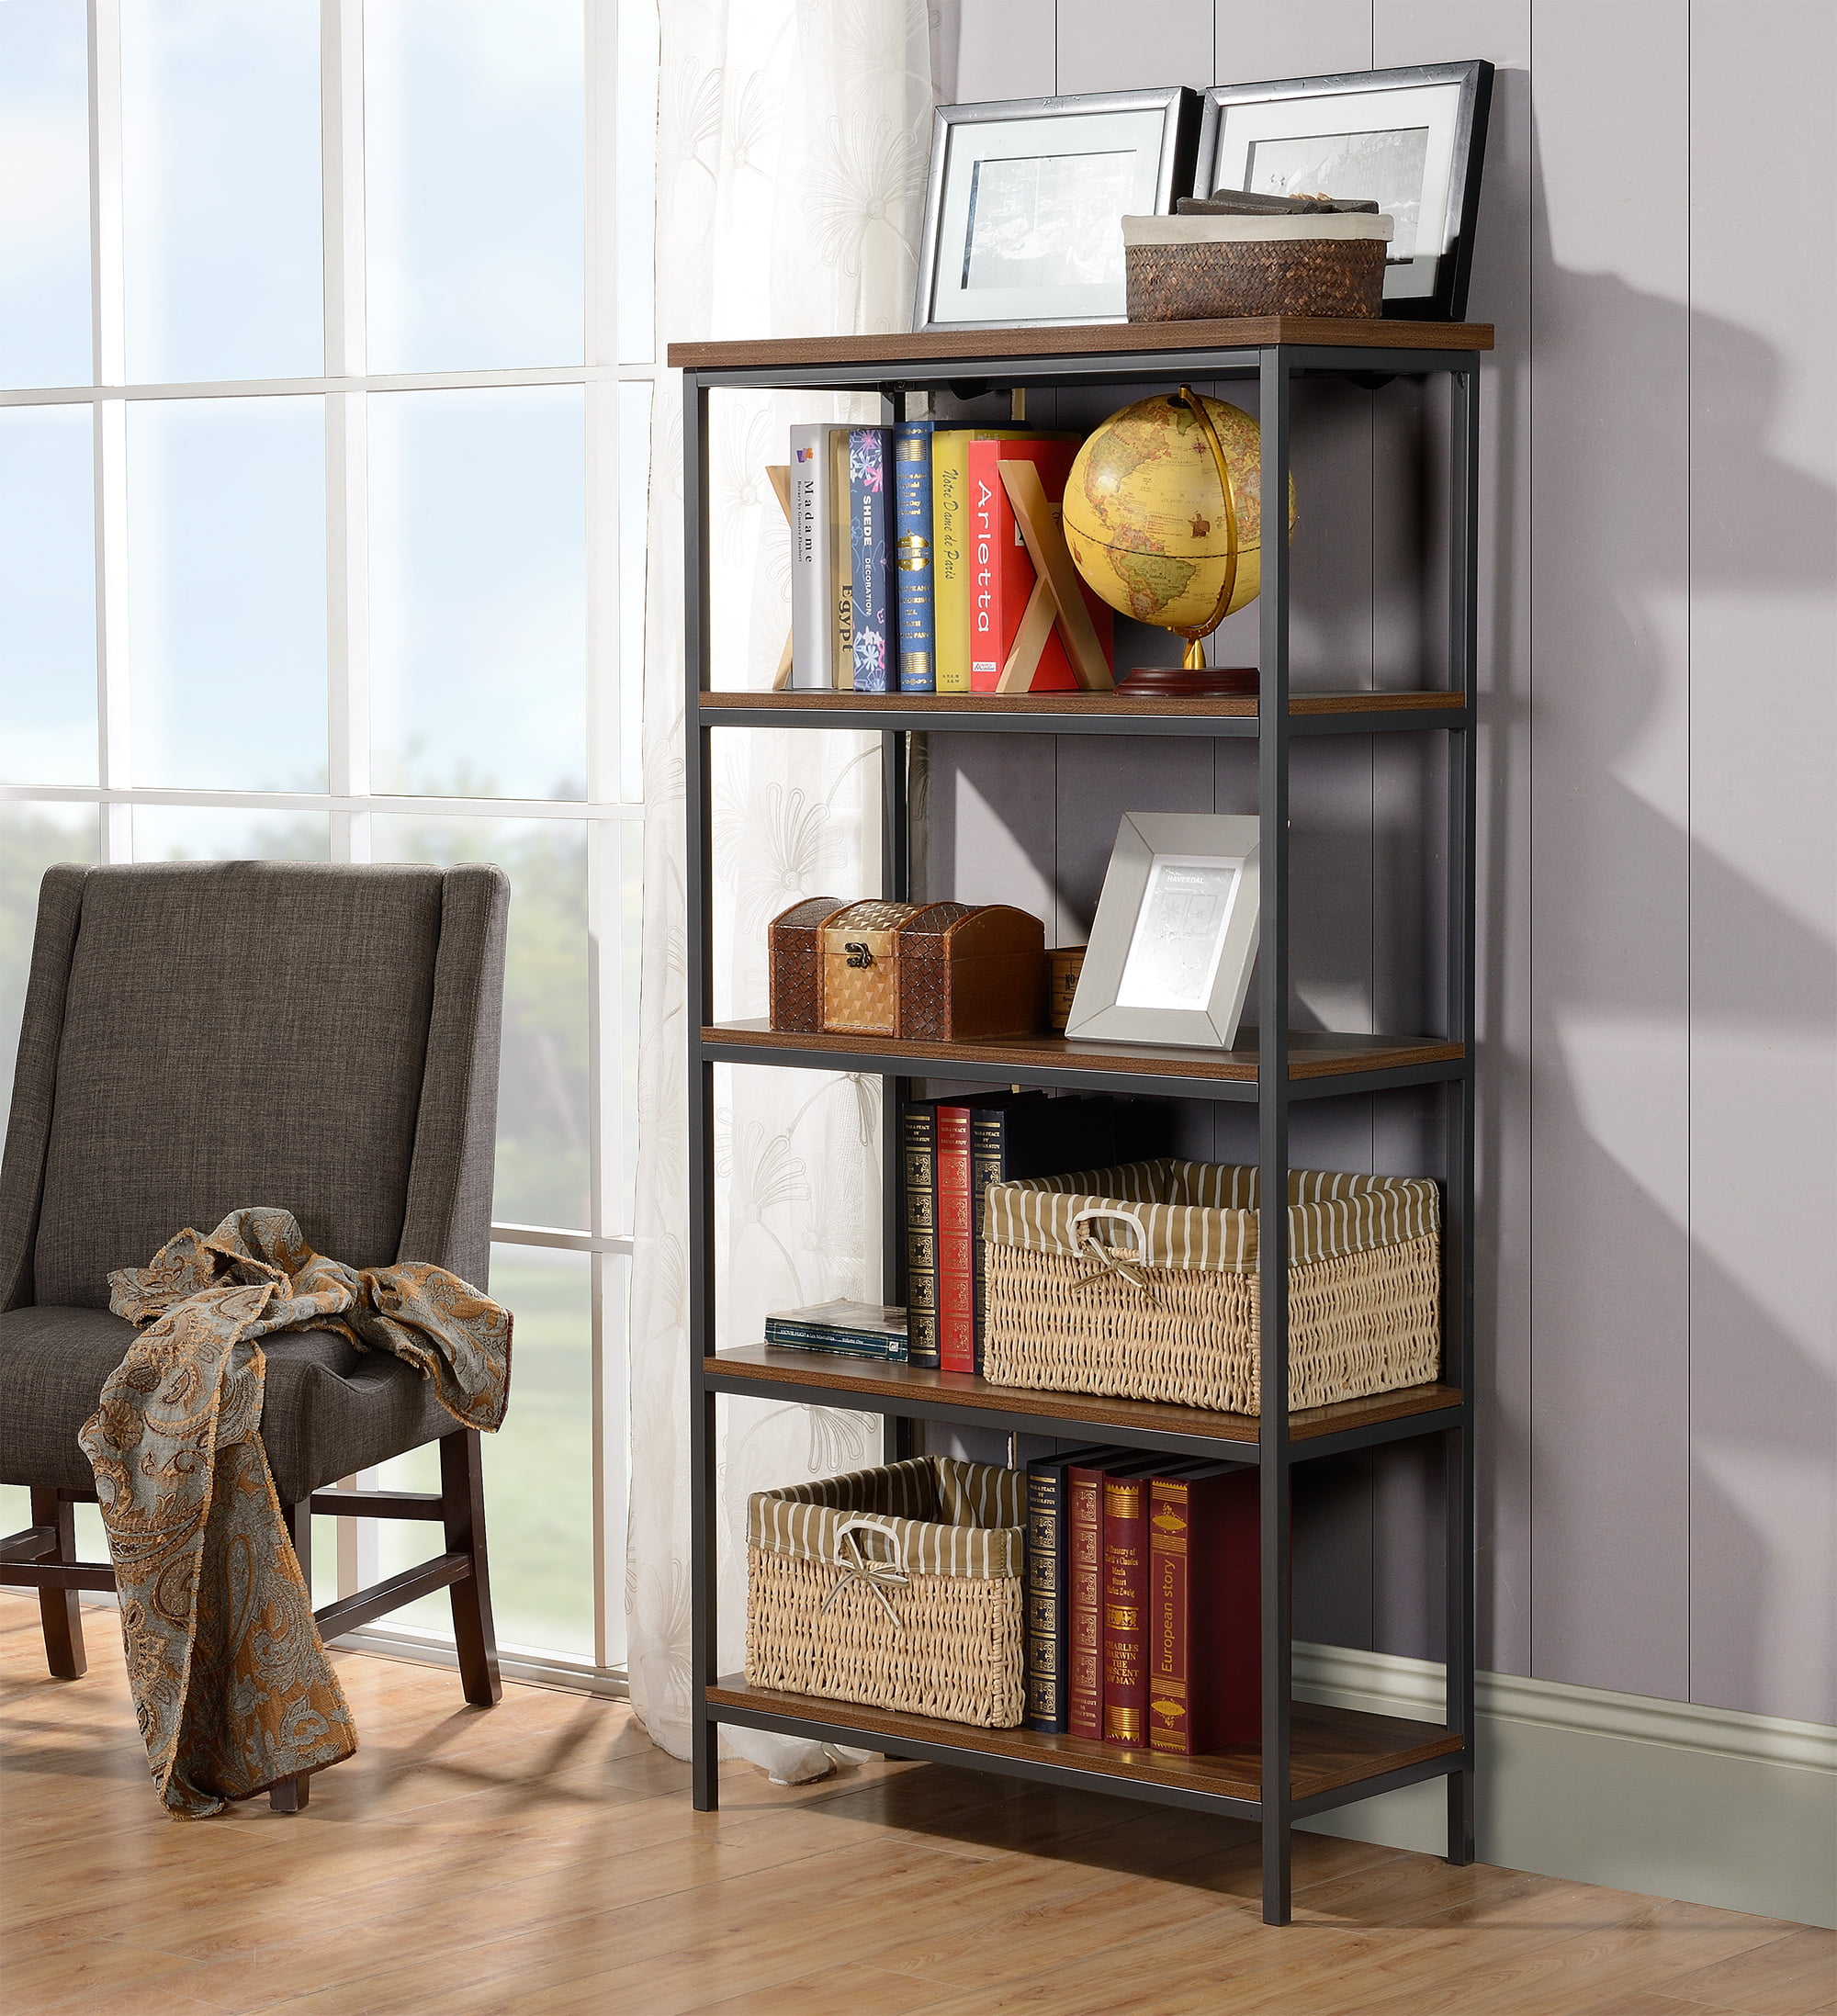 New Bookcase Shelves for Small Space